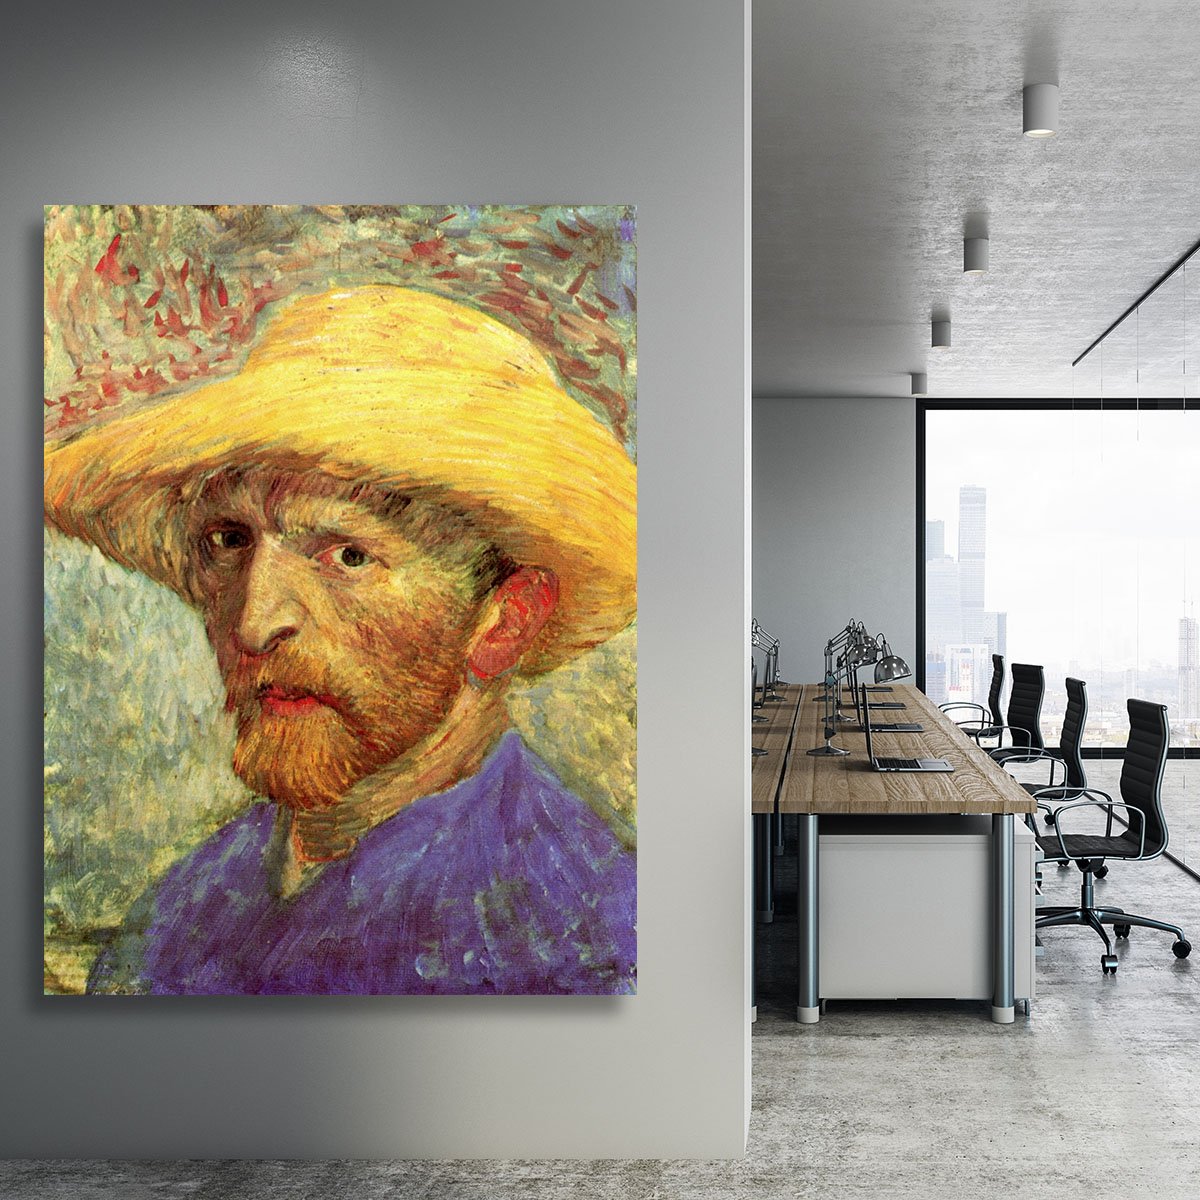 Self-Portrait with Straw Hat 3 by Van Gogh Canvas Print or Poster